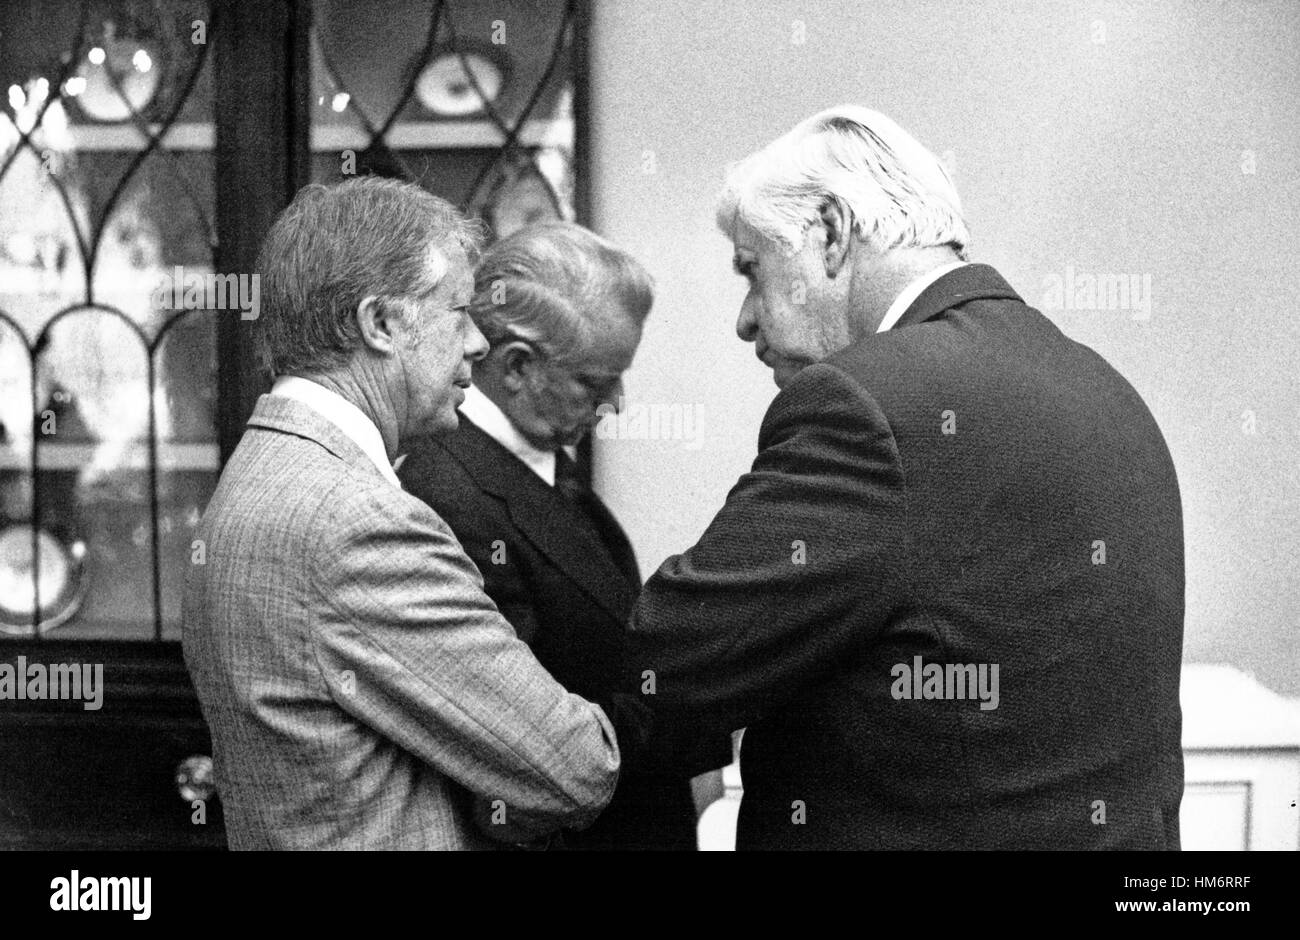 United States President Jimmy Carter talks with the Speaker of the US House of Representatives Thomas P. 'Tip' O'Neill (Democrat of Massachusetts) and US Senate Majority Leader Robert Byrd (Democrat of West Virginia) following the Democratic Congressional Stock Photo